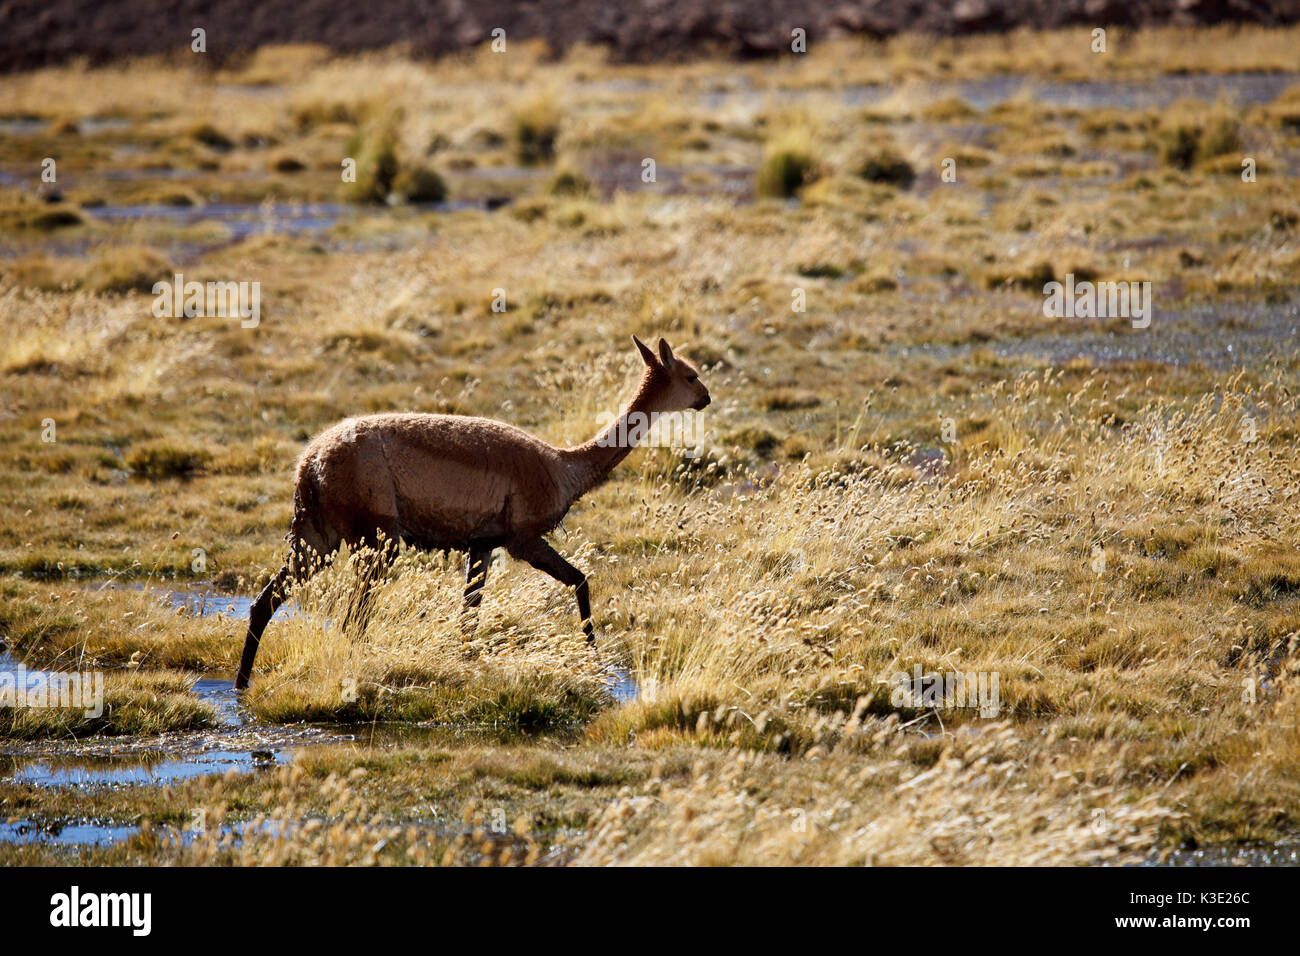 Chile, the North, Andines highland, Vicuna, Stock Photo